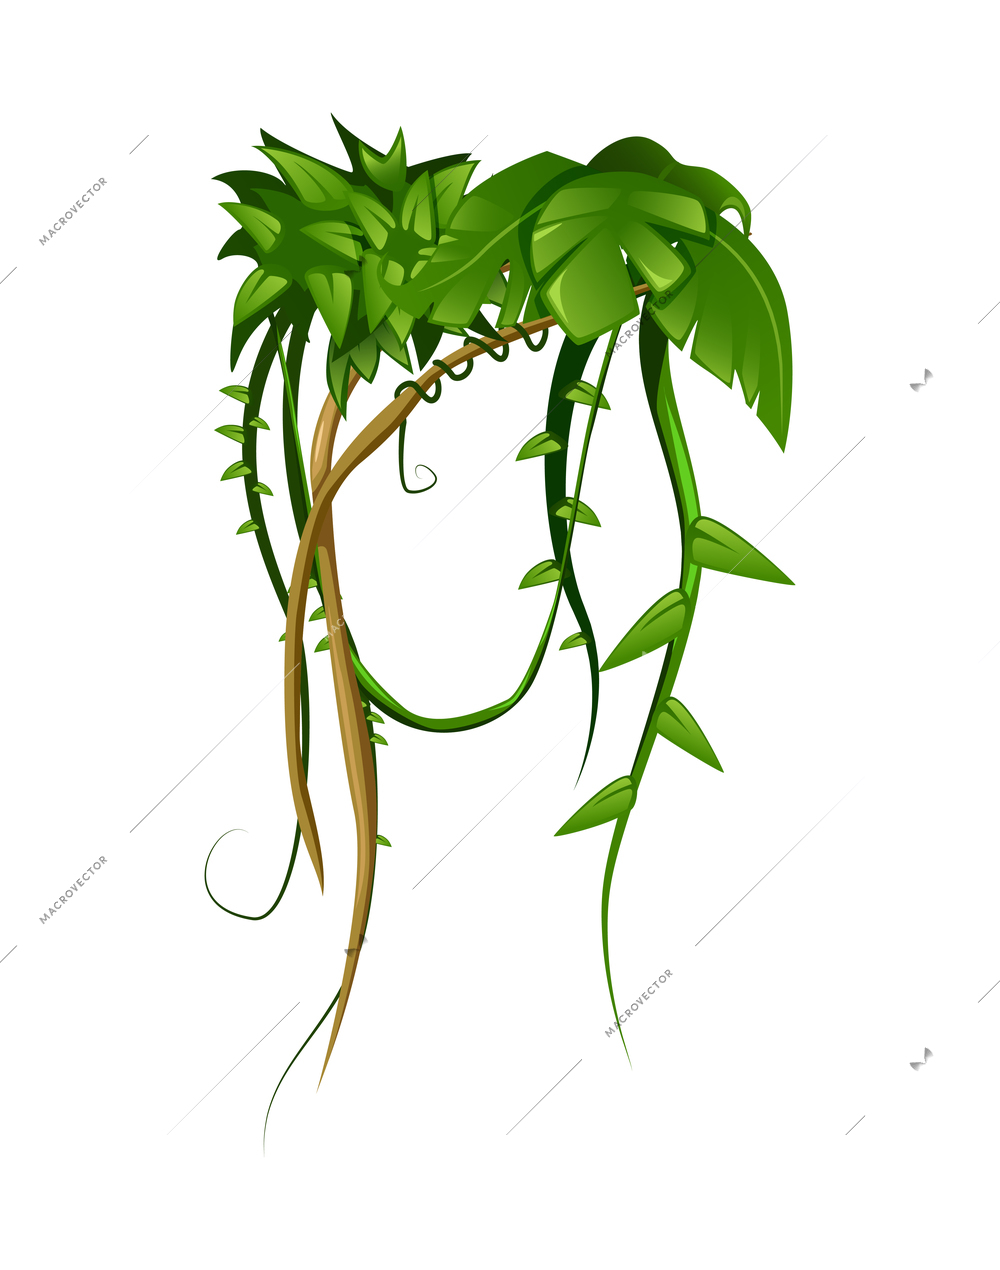 Liana tropical leaves cartoon composition with isolated image of hanging plant on blank background vector illustration